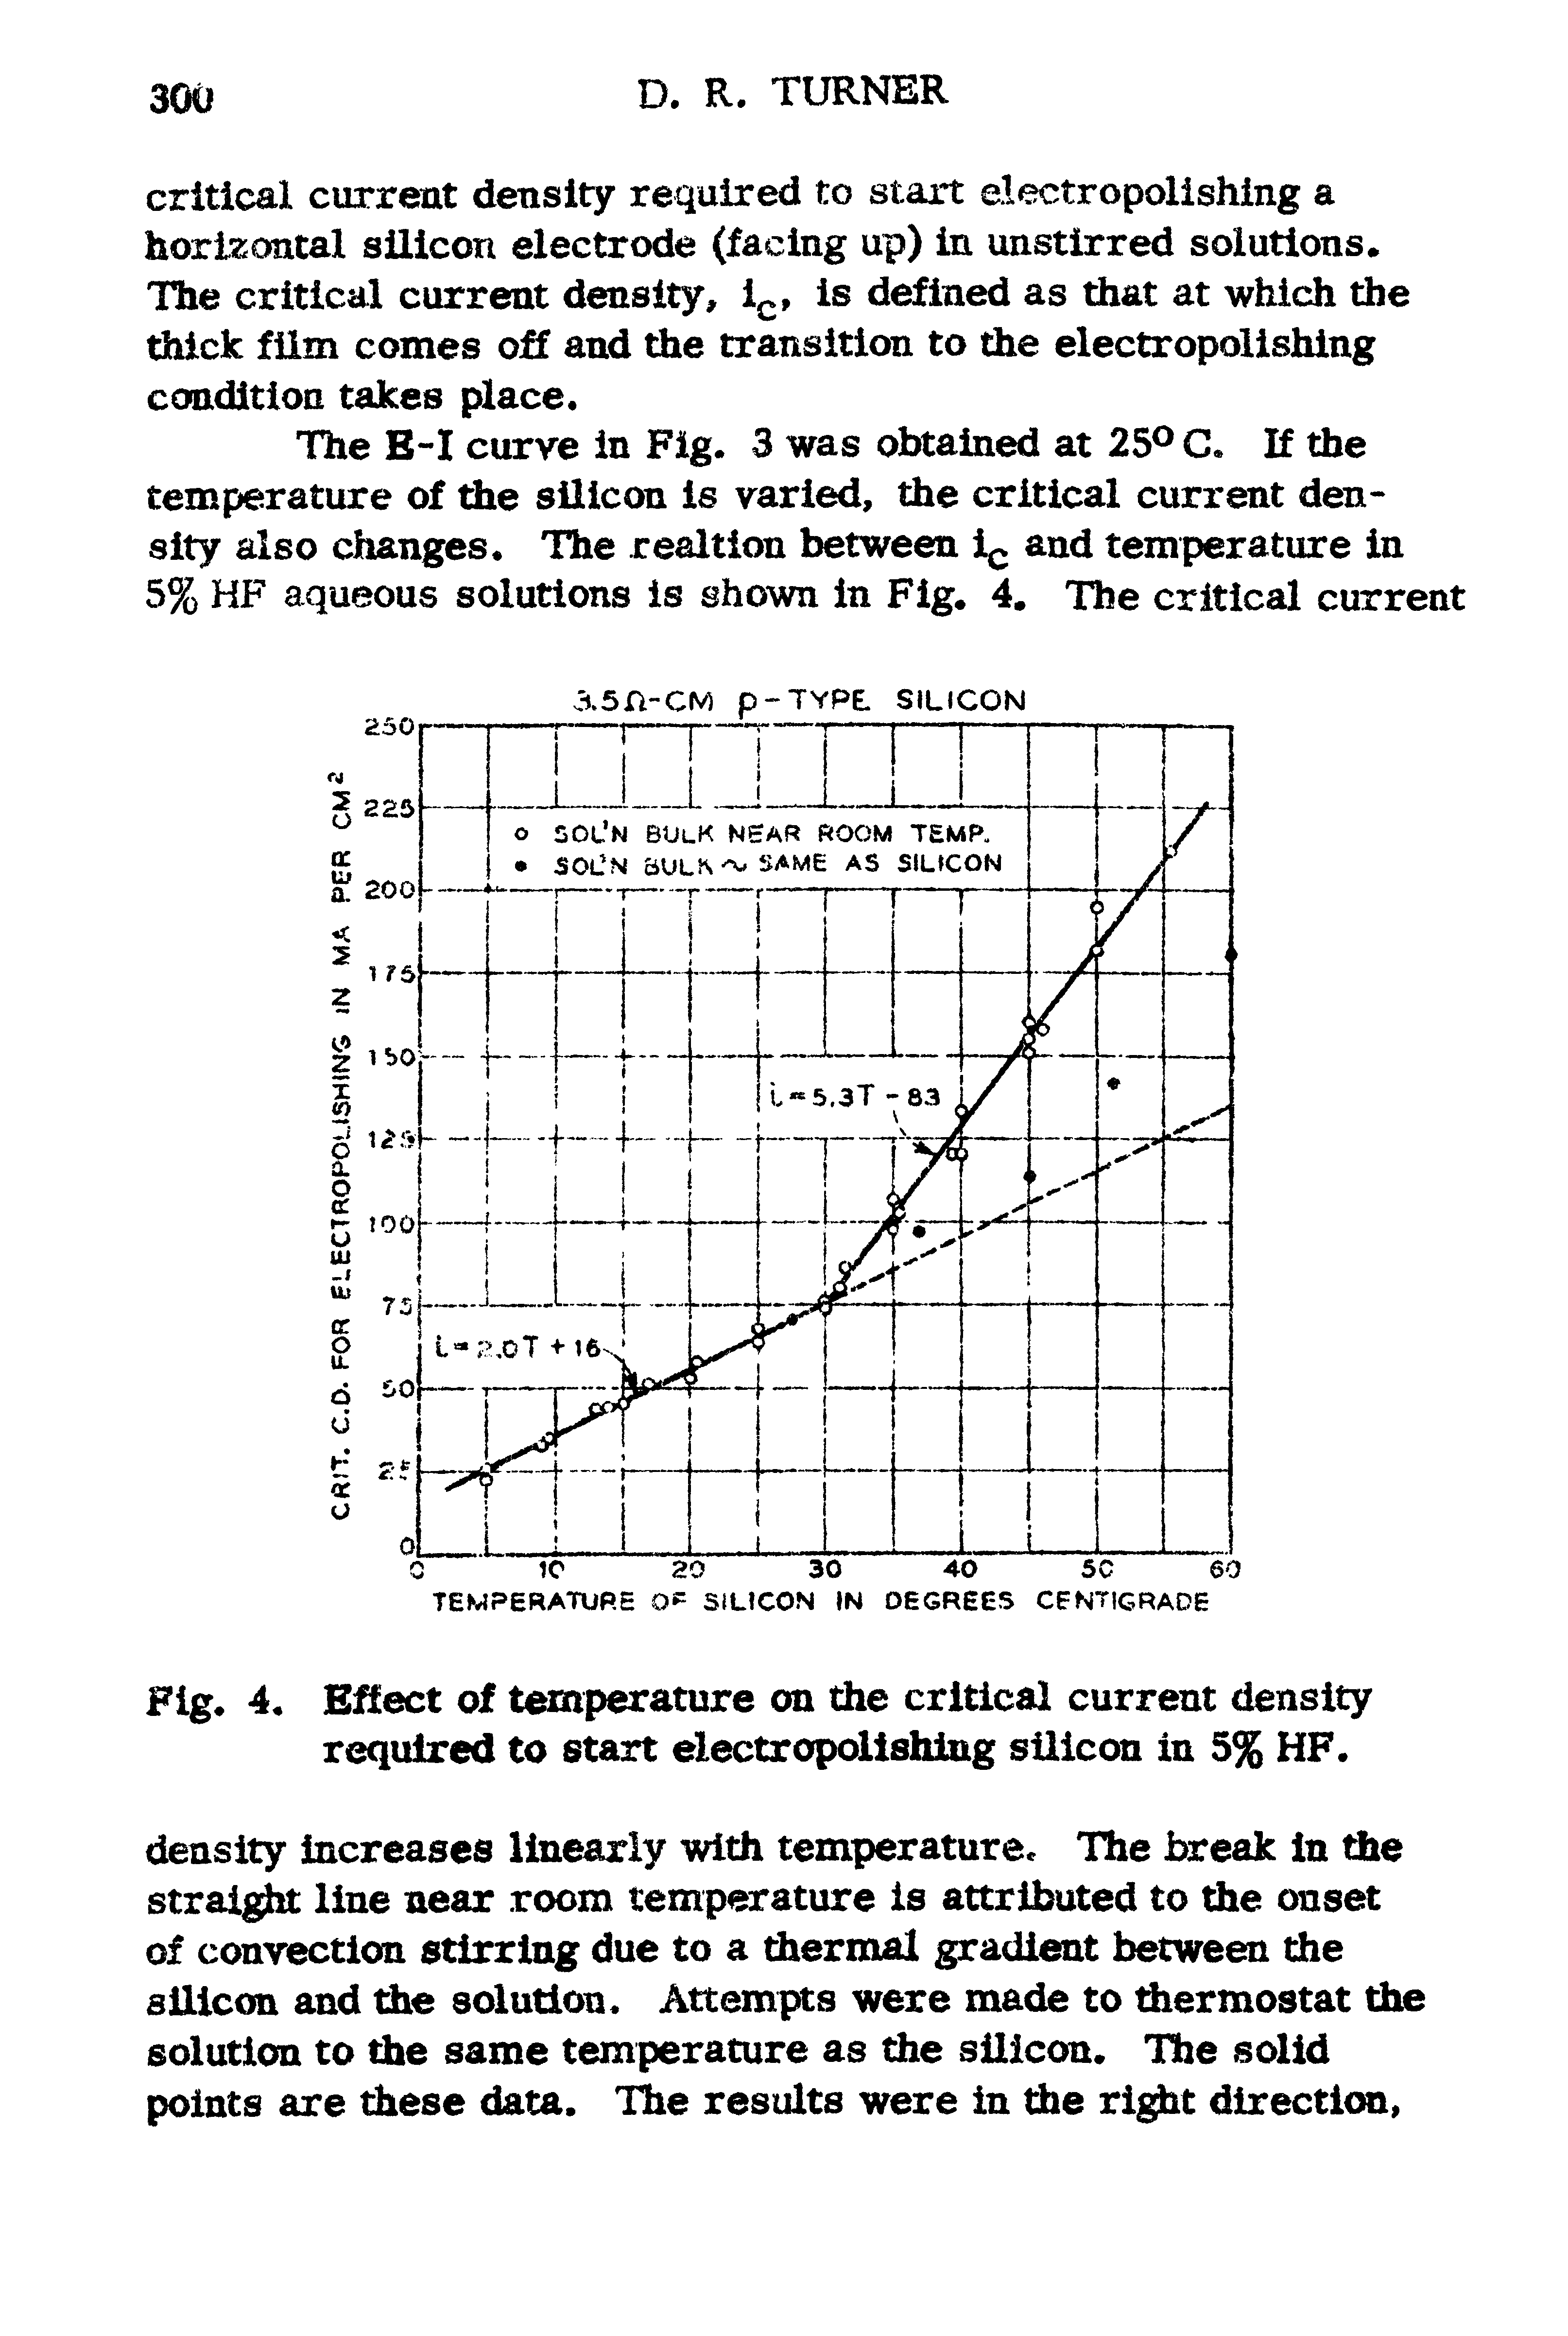 Fig. 4. Effect of temperature on the critical current density required to start electropolishing silicon in 5% HF.